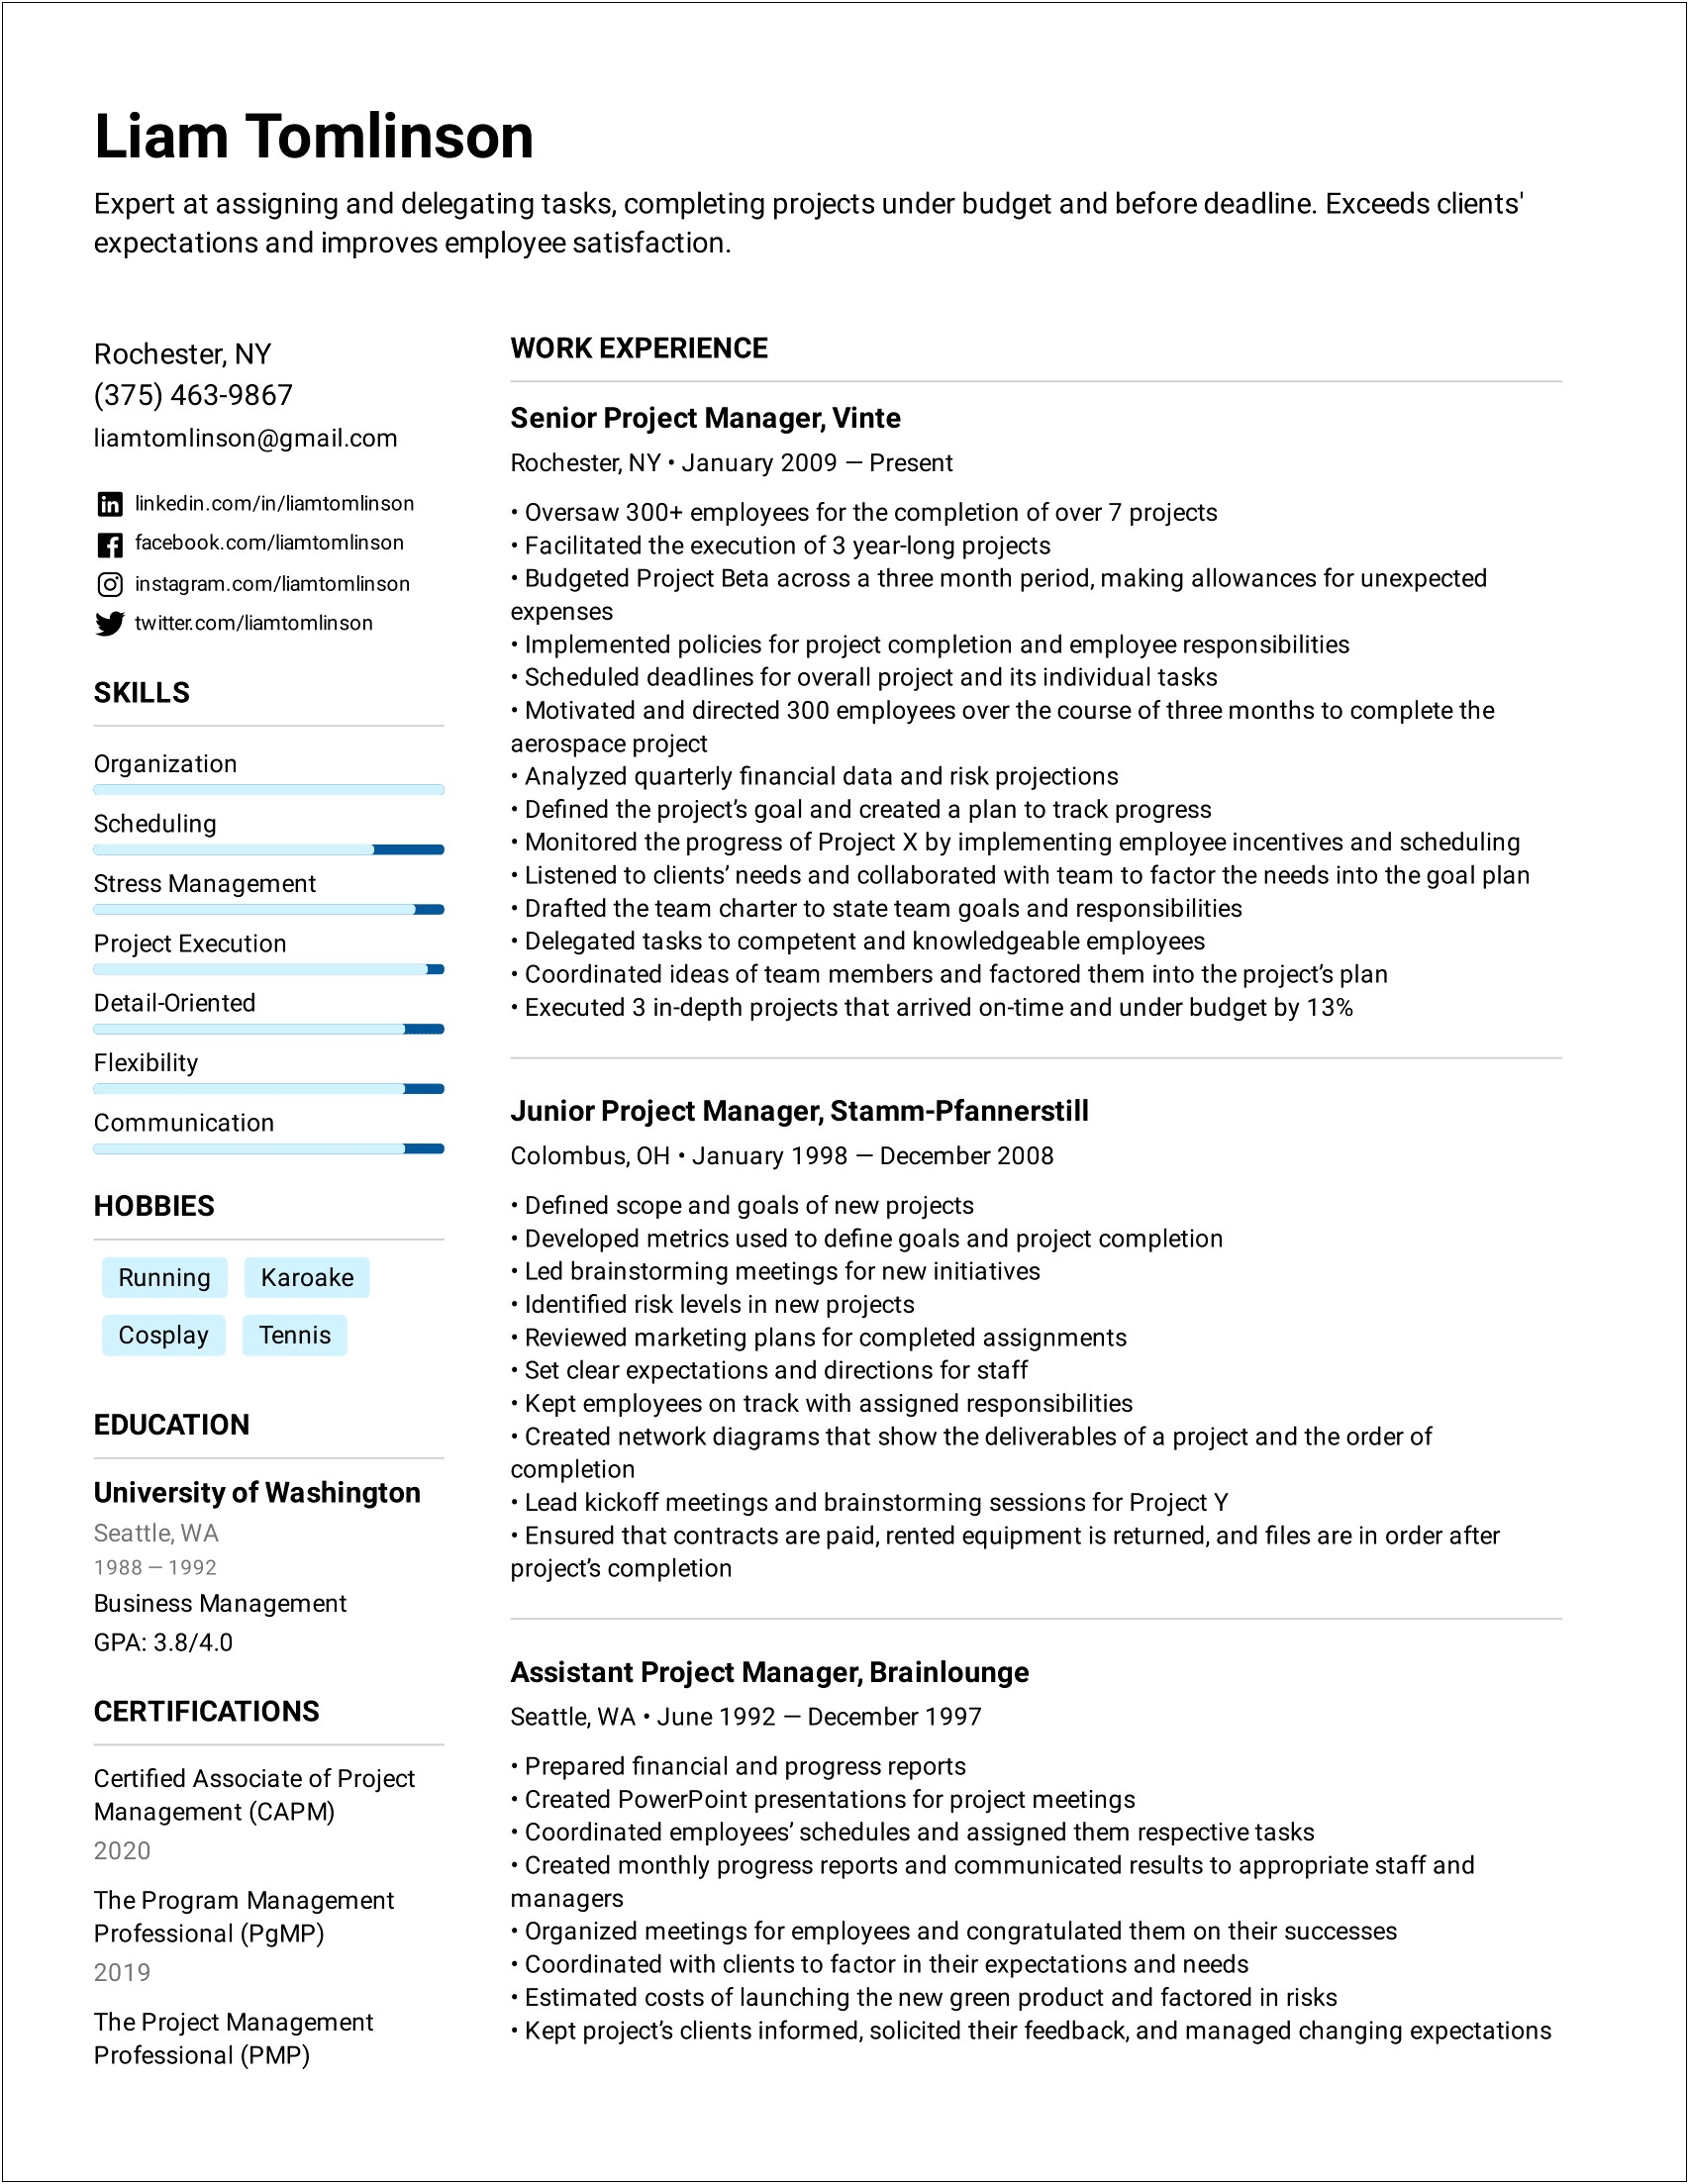 Project Manager Resume Blurb Examples